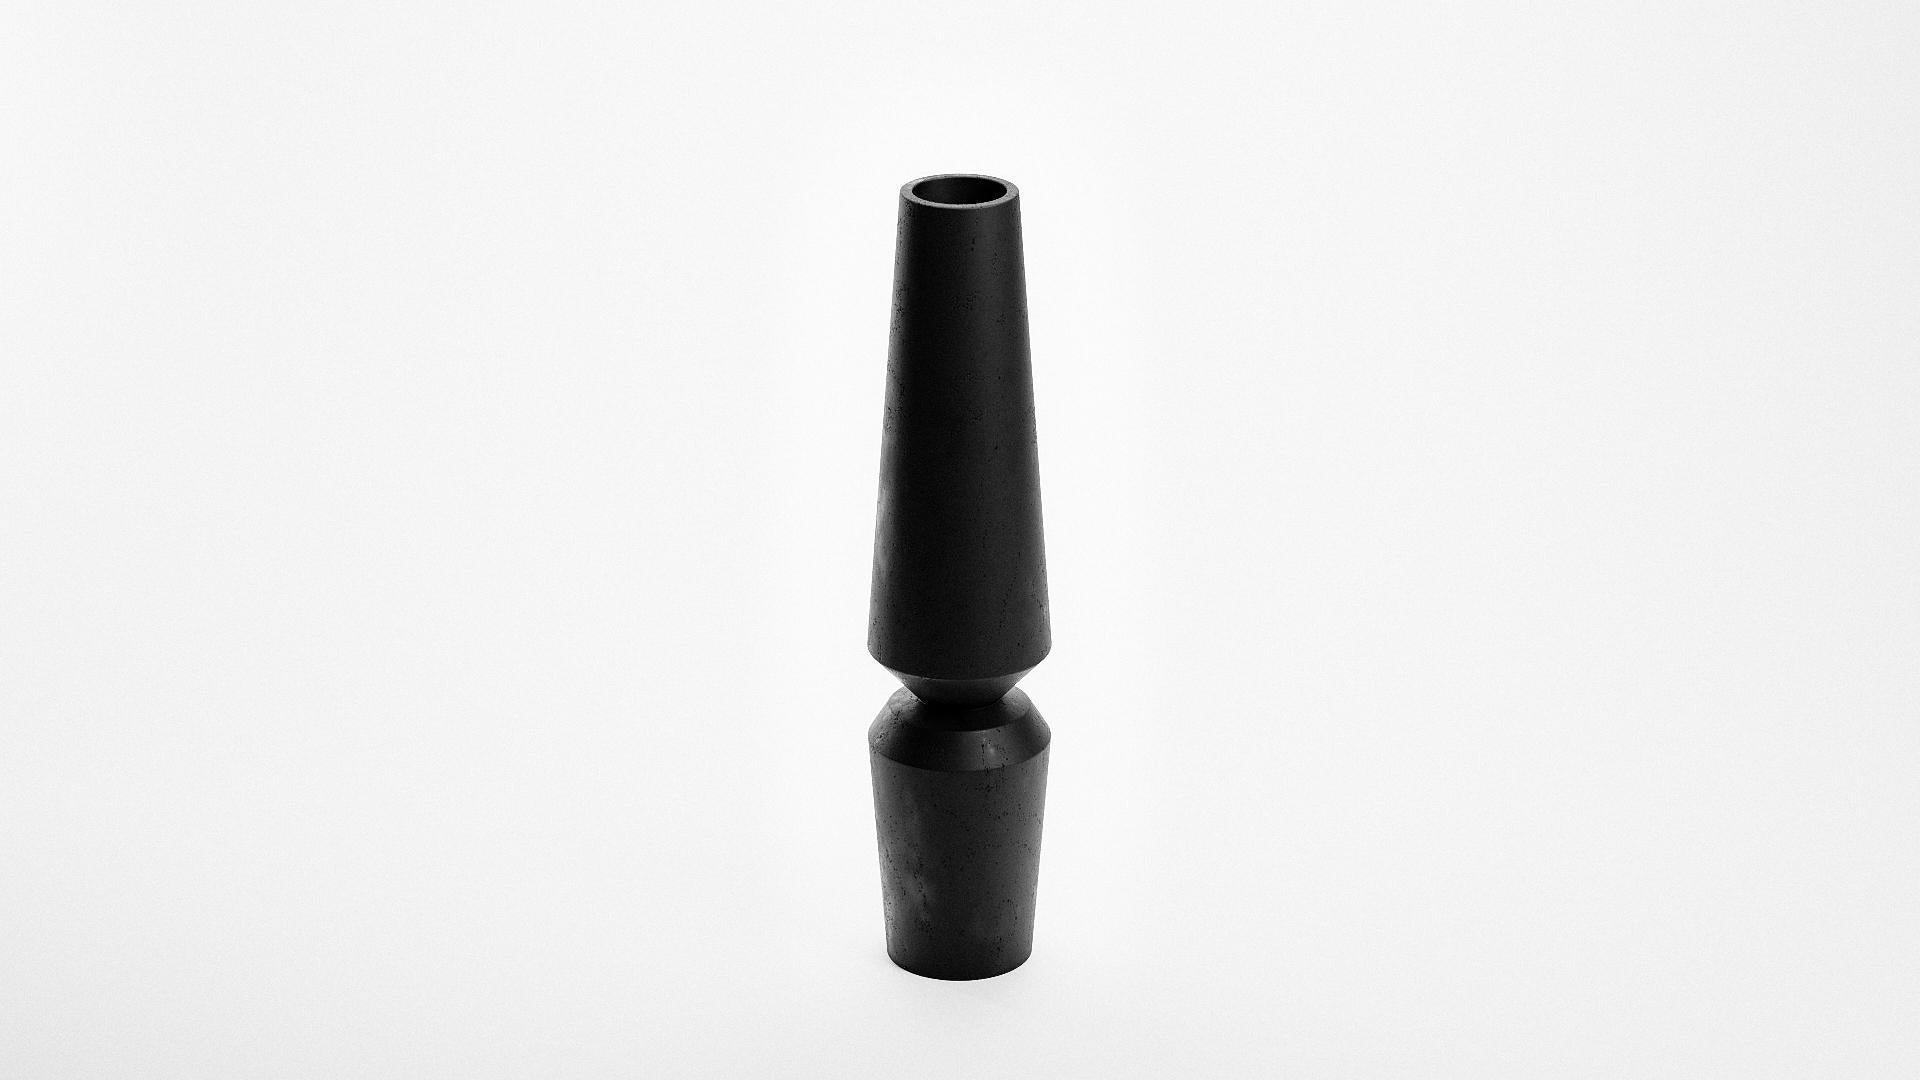 Stone vases candleholders and jar set from Maria Osminina's Matter collection.

Matter is a collection of sculptural pieces created around the idea of the pristine, power of nature. Each object contains a strong space/counterspace concept which